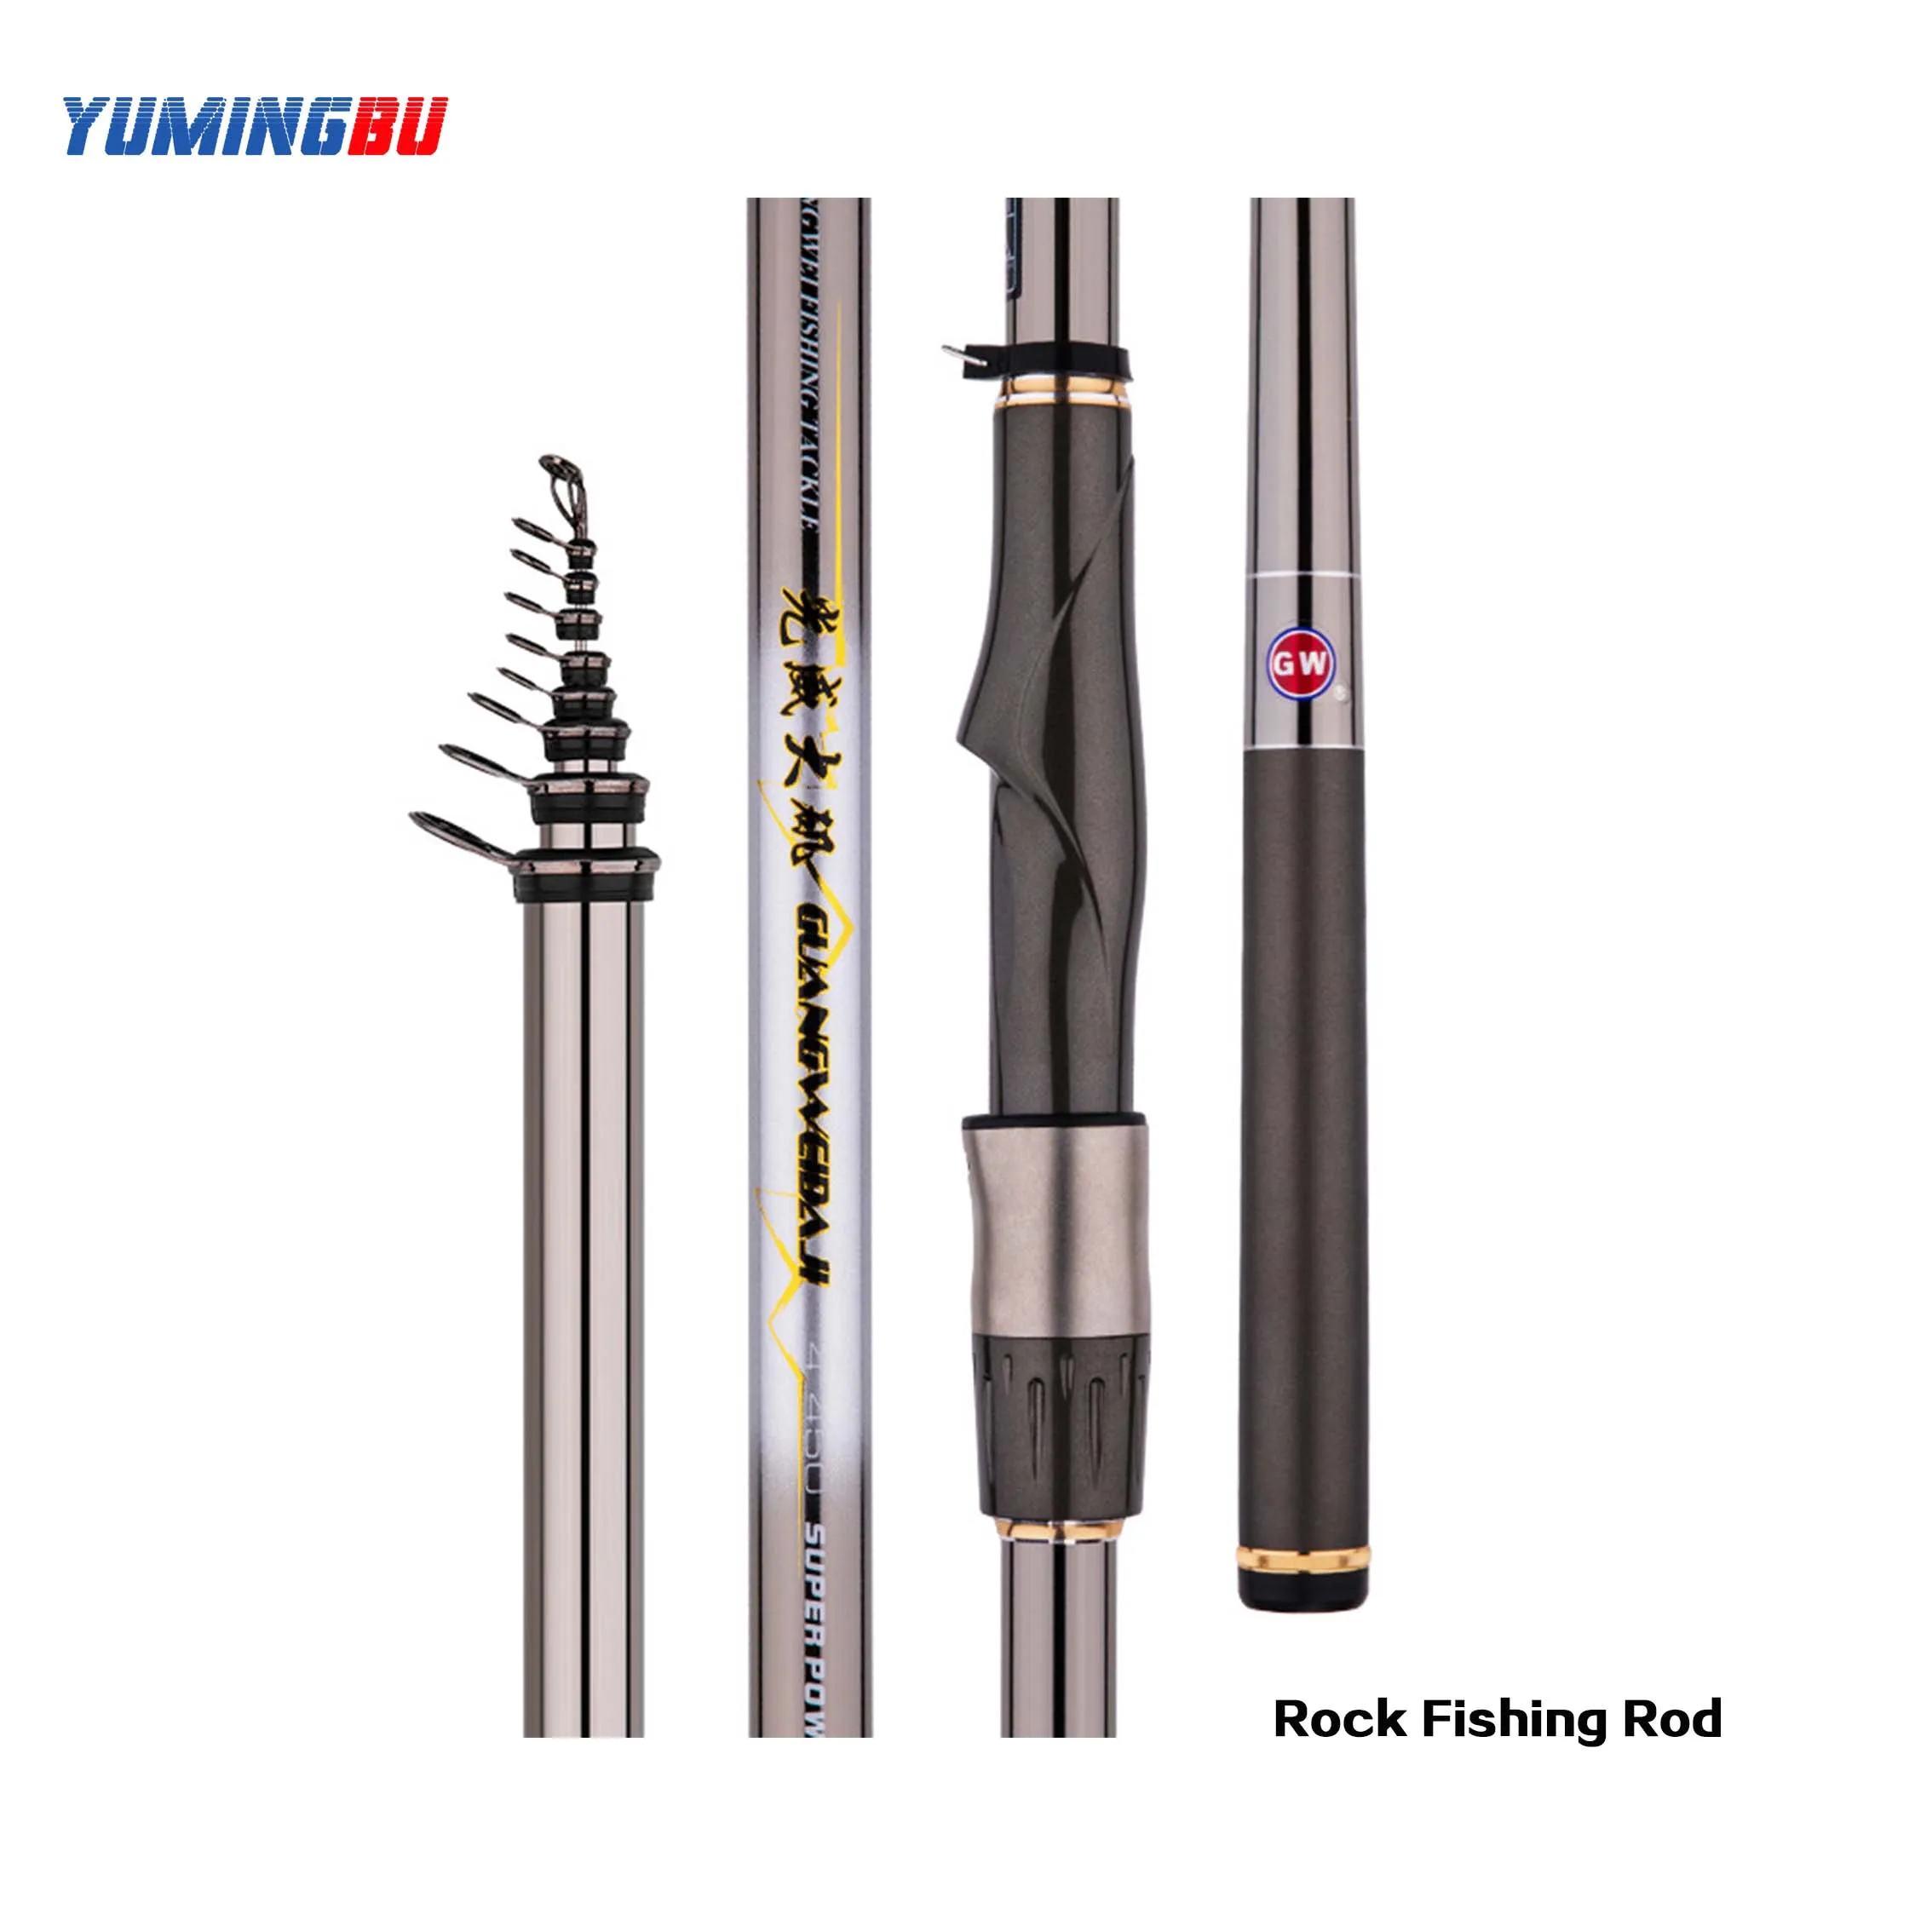 YumingBu Carbon Super Light and Stiff Rock Fishing Rod with Large Guide  Ring over Space Bean,SIC Ceramic Guide Ring